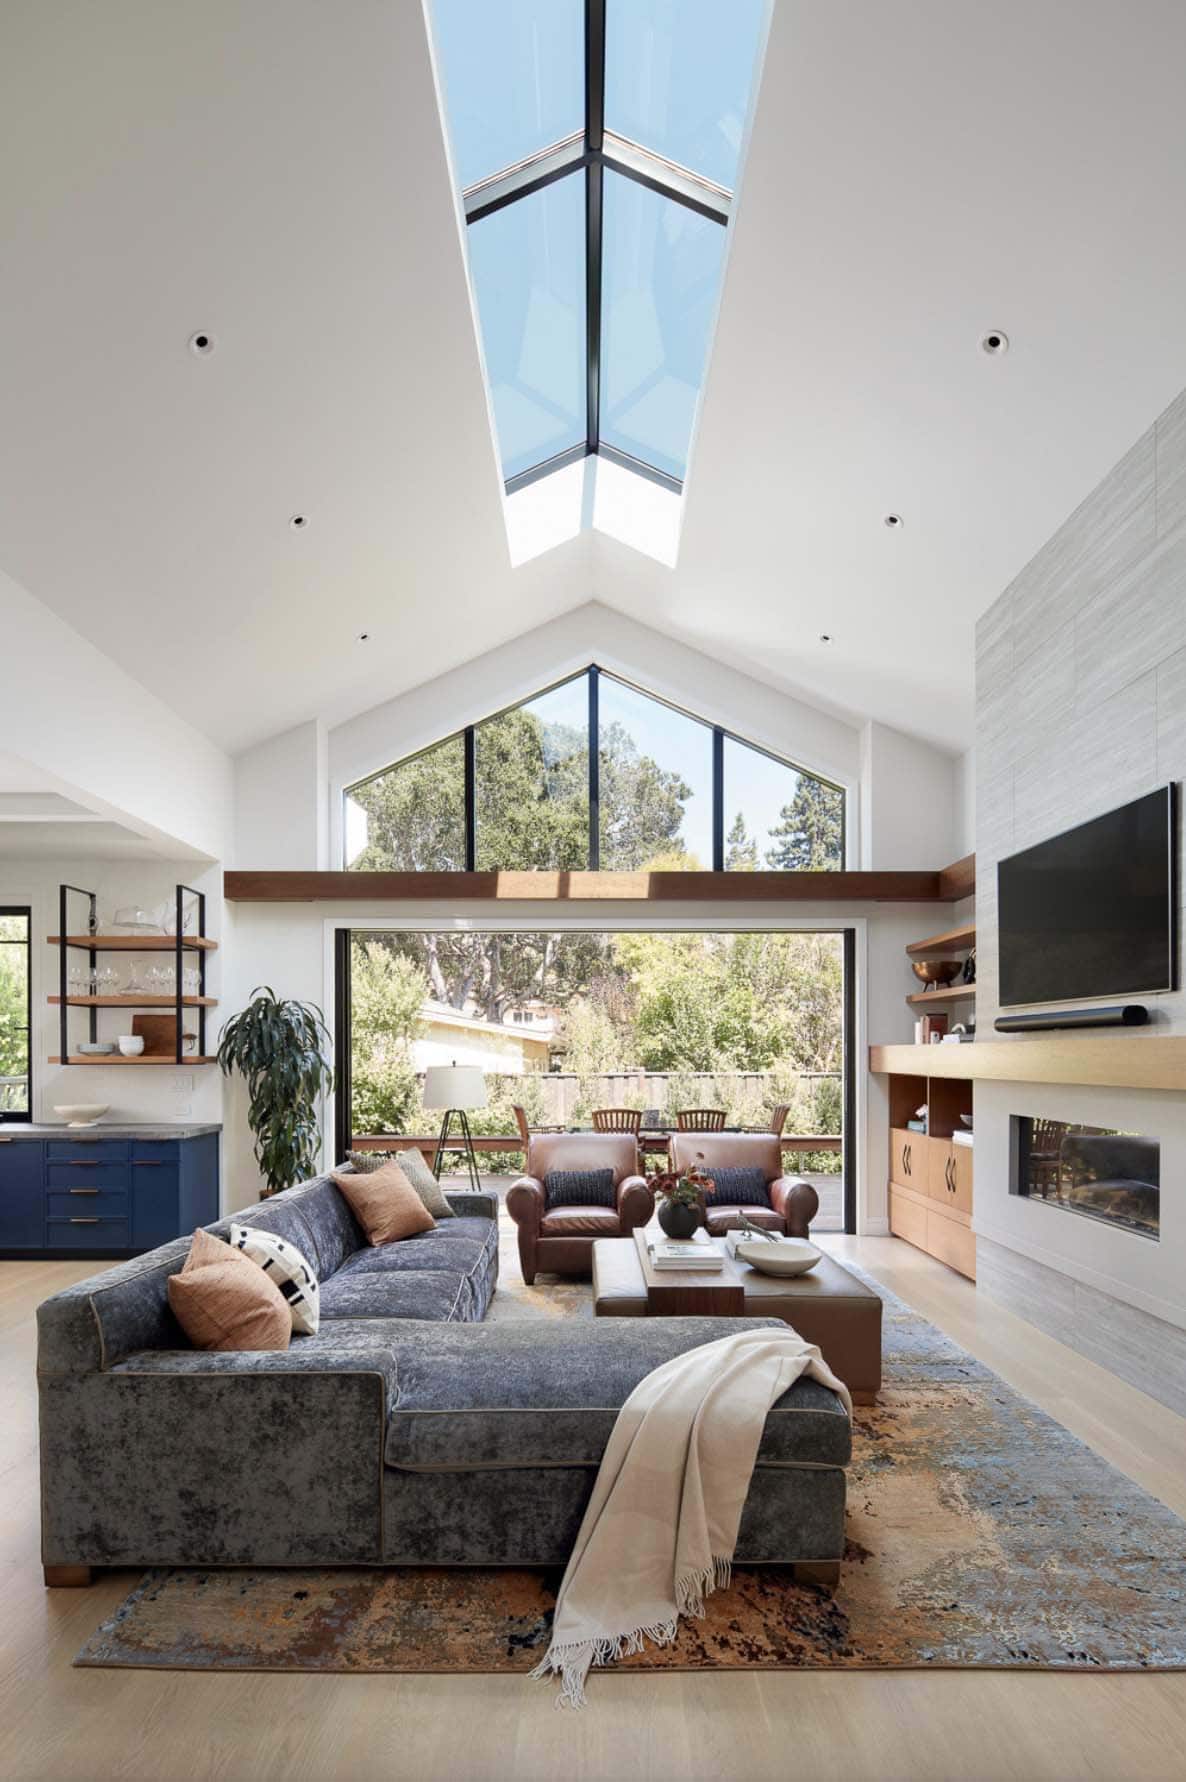 transitional style living room with vaulted ceiling and a skylight